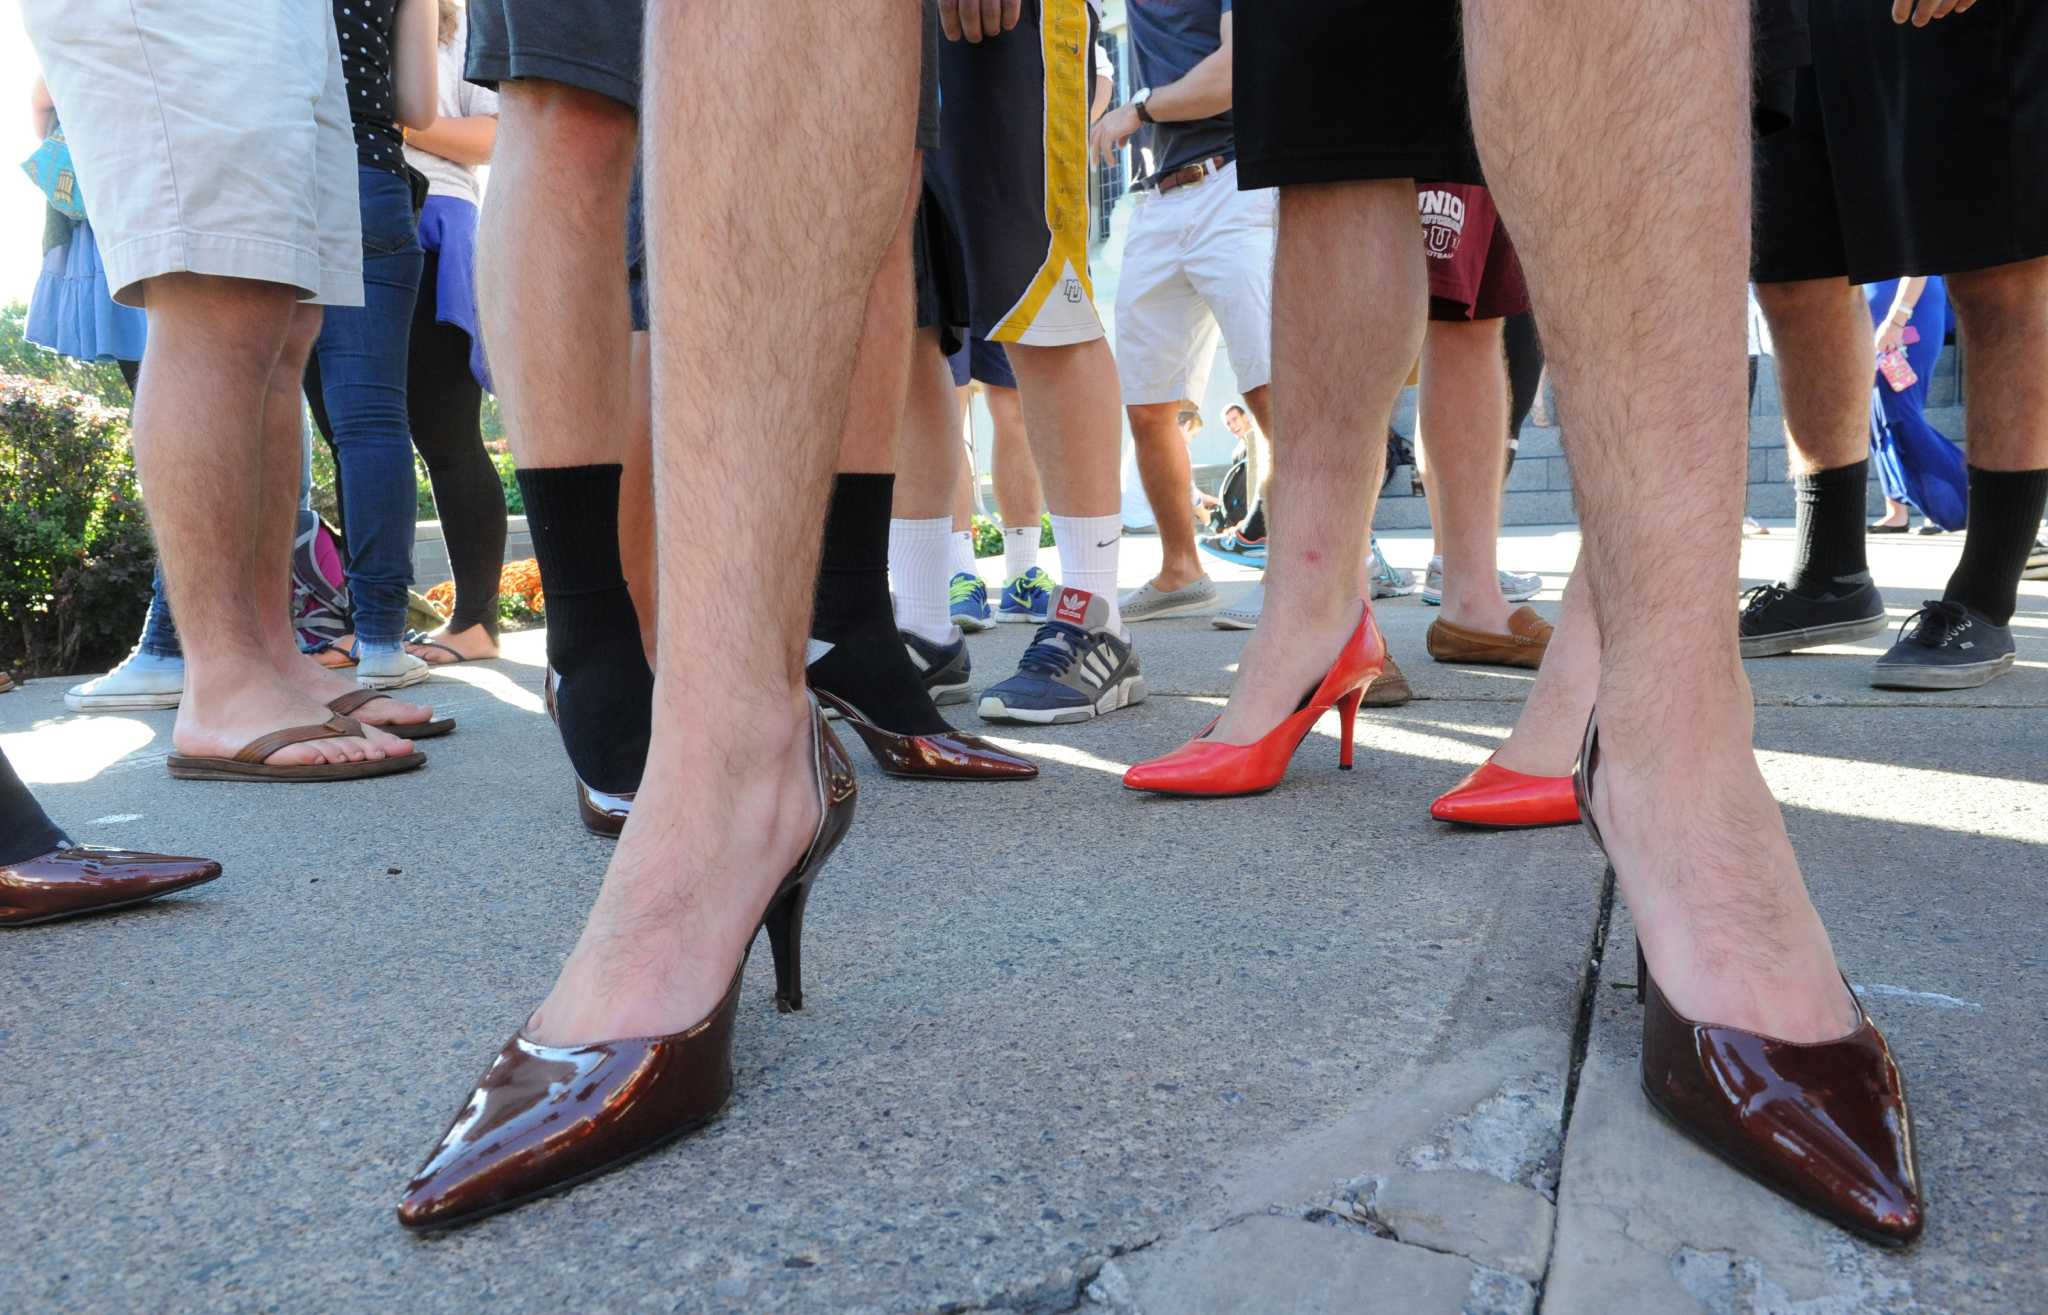 A Mile In Her Shoes